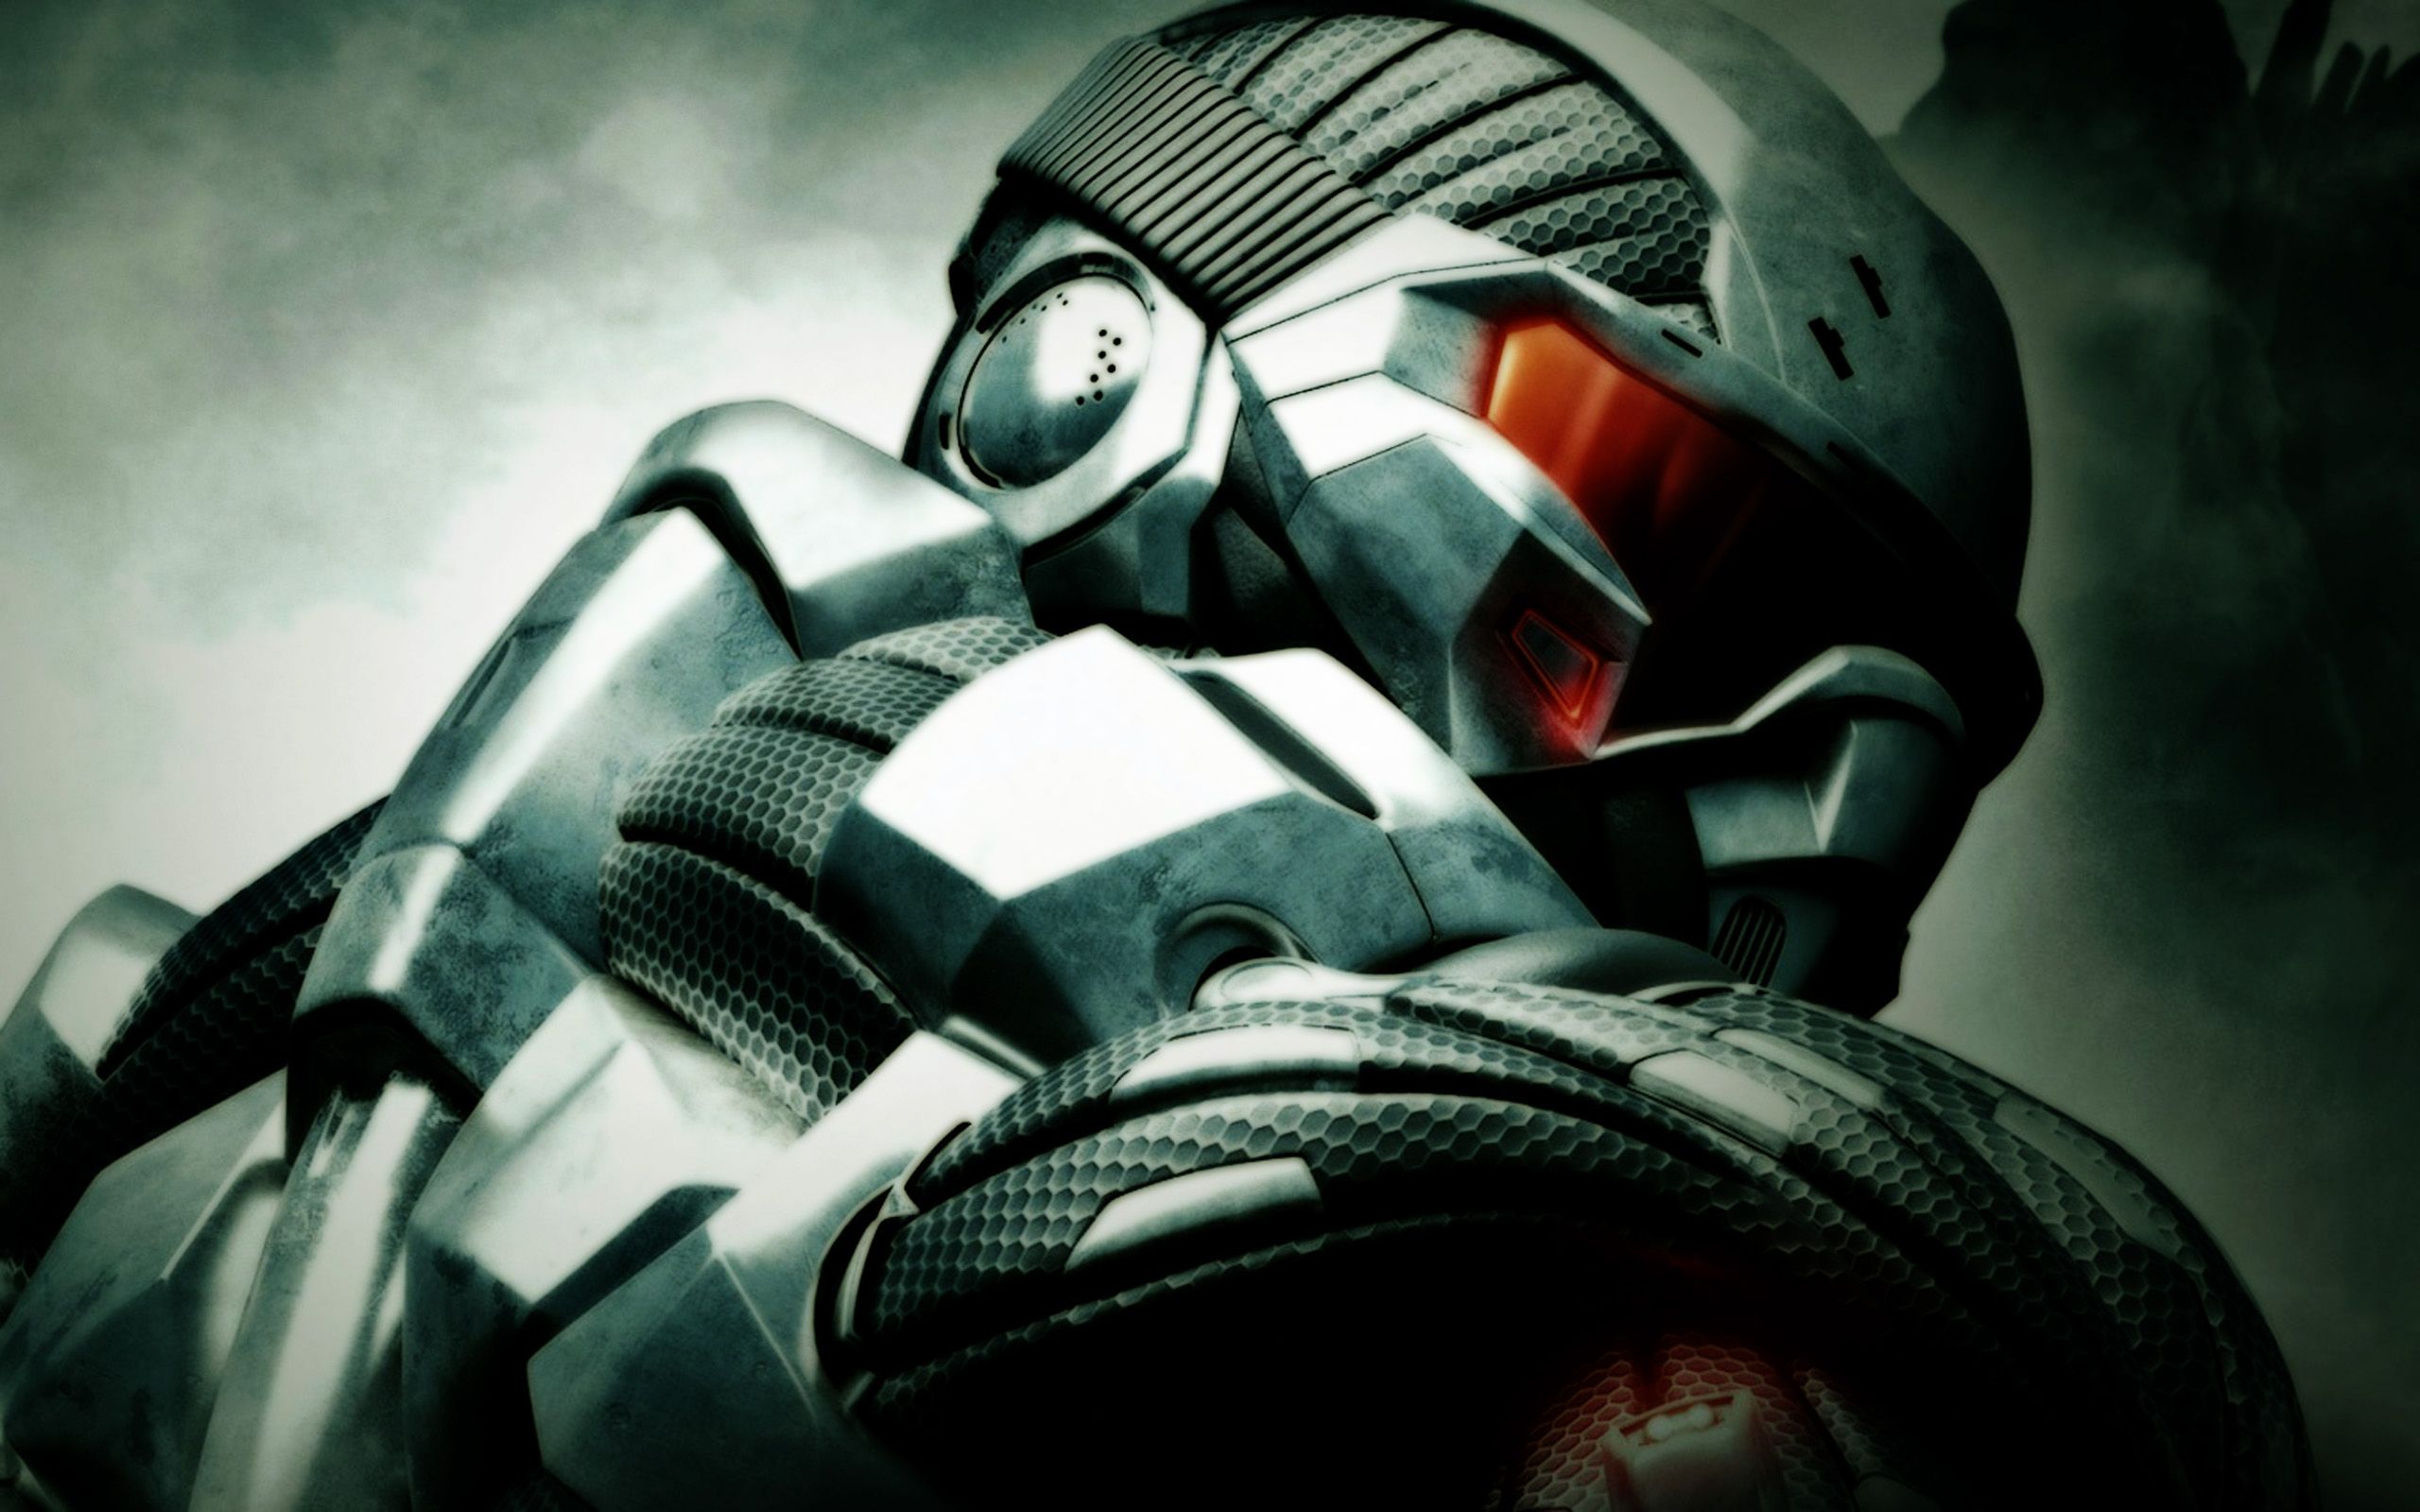 Awesome HD Robot Wallpaper & Background For Free Download. Robot wallpaper, Cool ninja wallpaper, Robot image